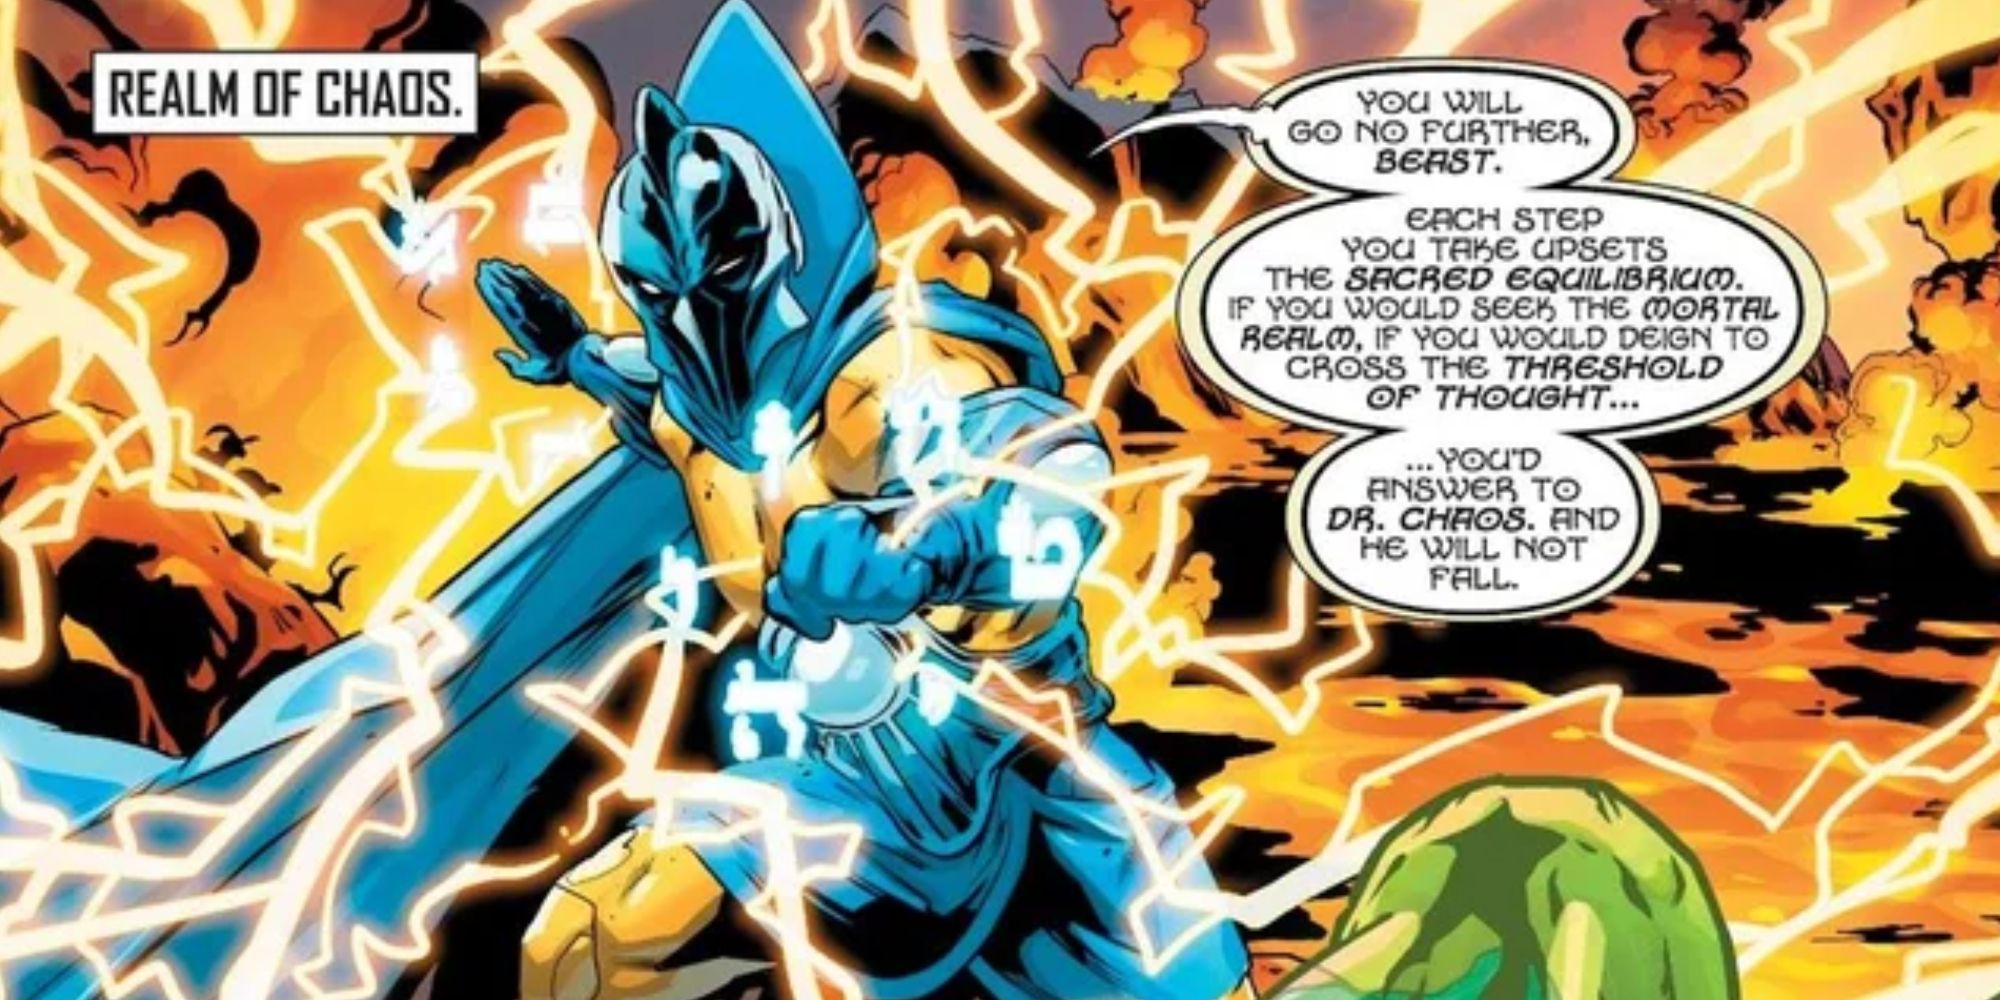 Doctor Chaos attacks in DC Comics.